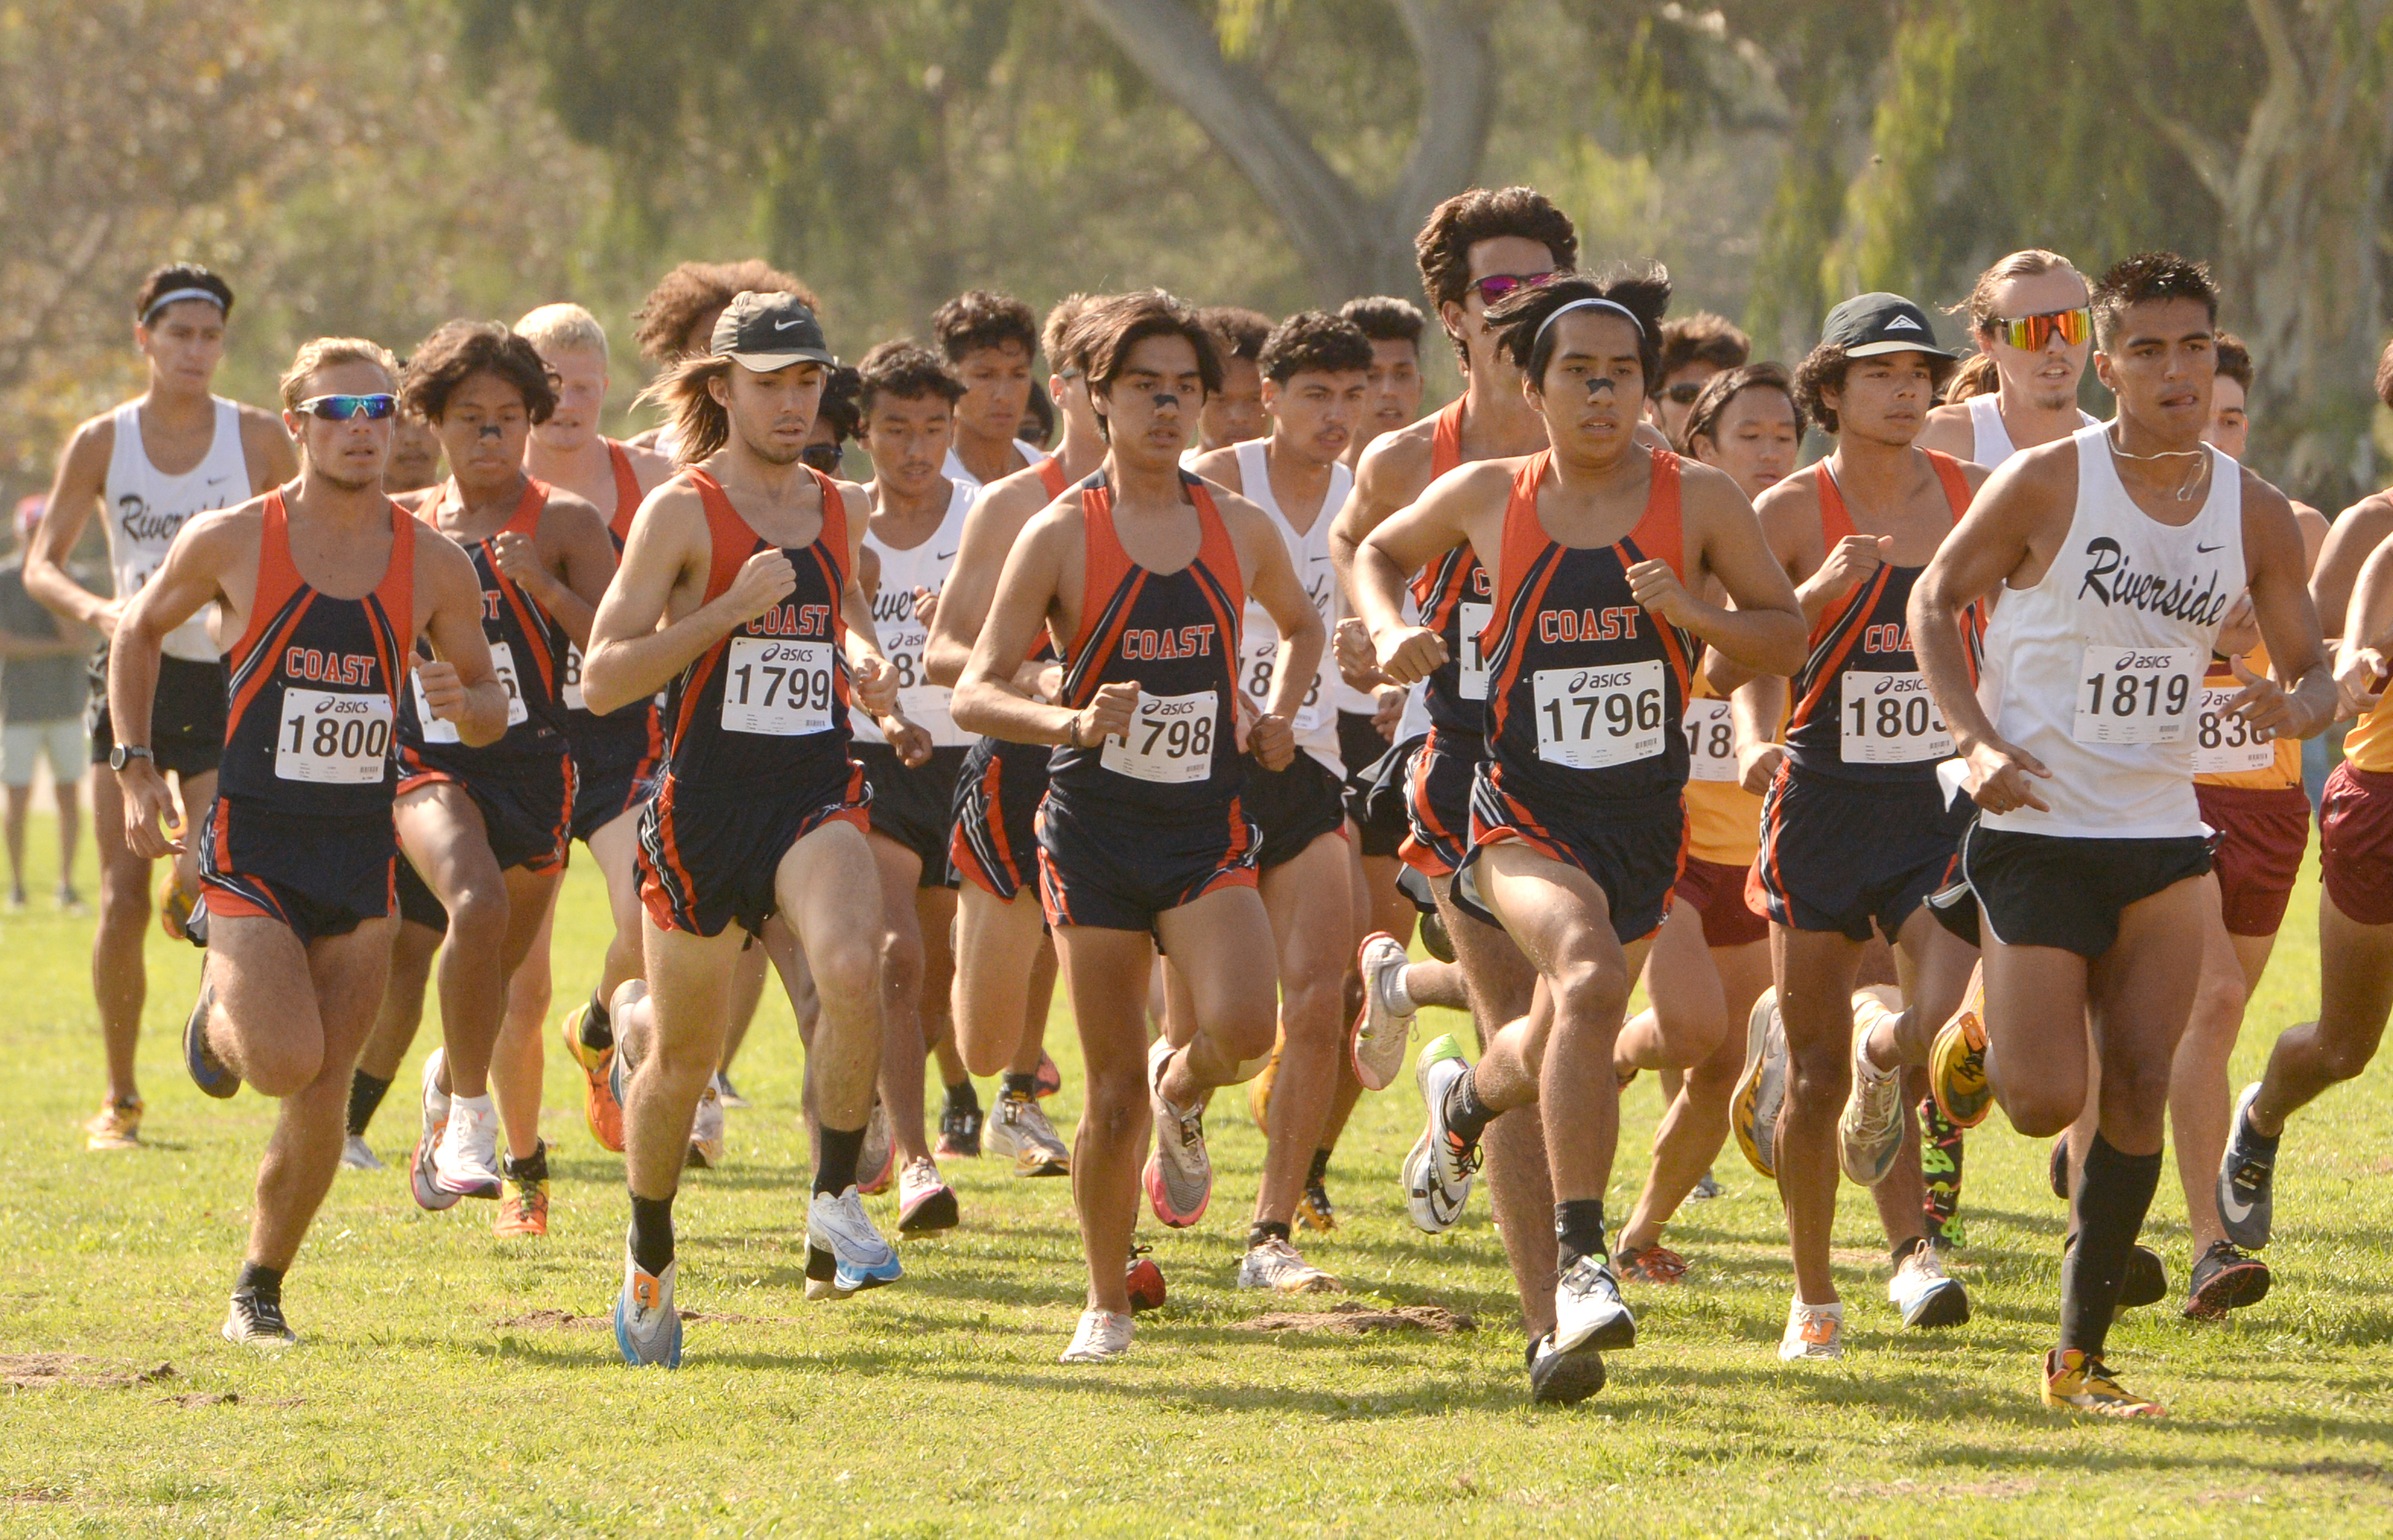 Pirates finish 14th at CCCAA State Meet